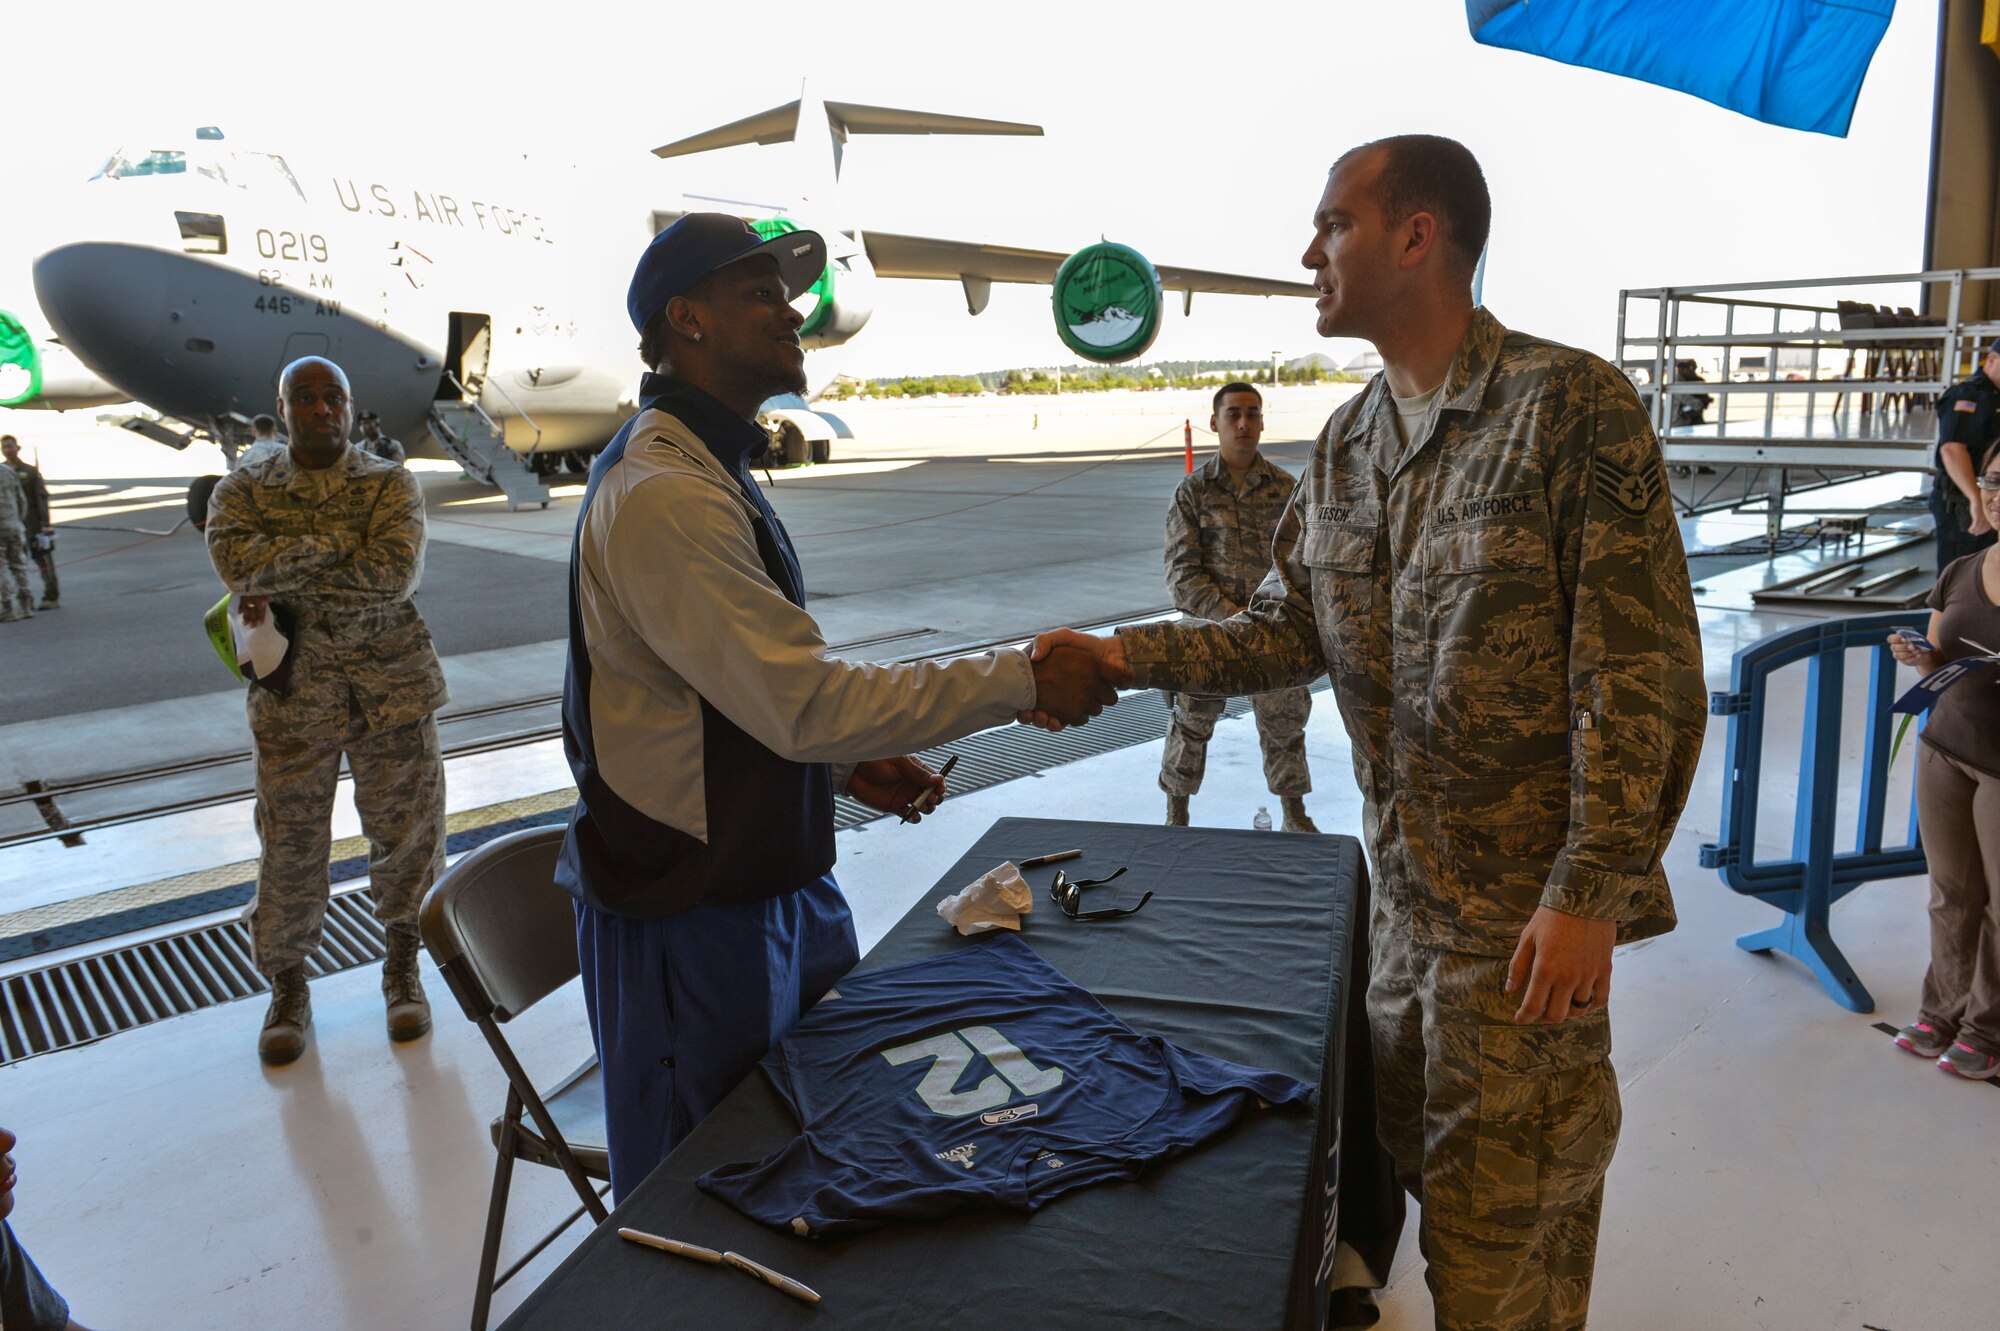 Phil Bates, left, Seattle Seahawks wide receiver, thanks Staff Sgt. Ramsey Tesch  for his military service July 1, 2014, after signing a shirt for his Airman leadership school during the 2014 Seattle Seahawks 12 Tour at Joint Base Lewis-McChord, Wash. Bates is part of the 12 Tour traveling through the Pacific Northwest thanking fans for their support during the championship season. Tesch is a 62nd Aerial Port Squadron information controller. (U.S. Air Force photo/Staff Sgt. Russ Jackson)